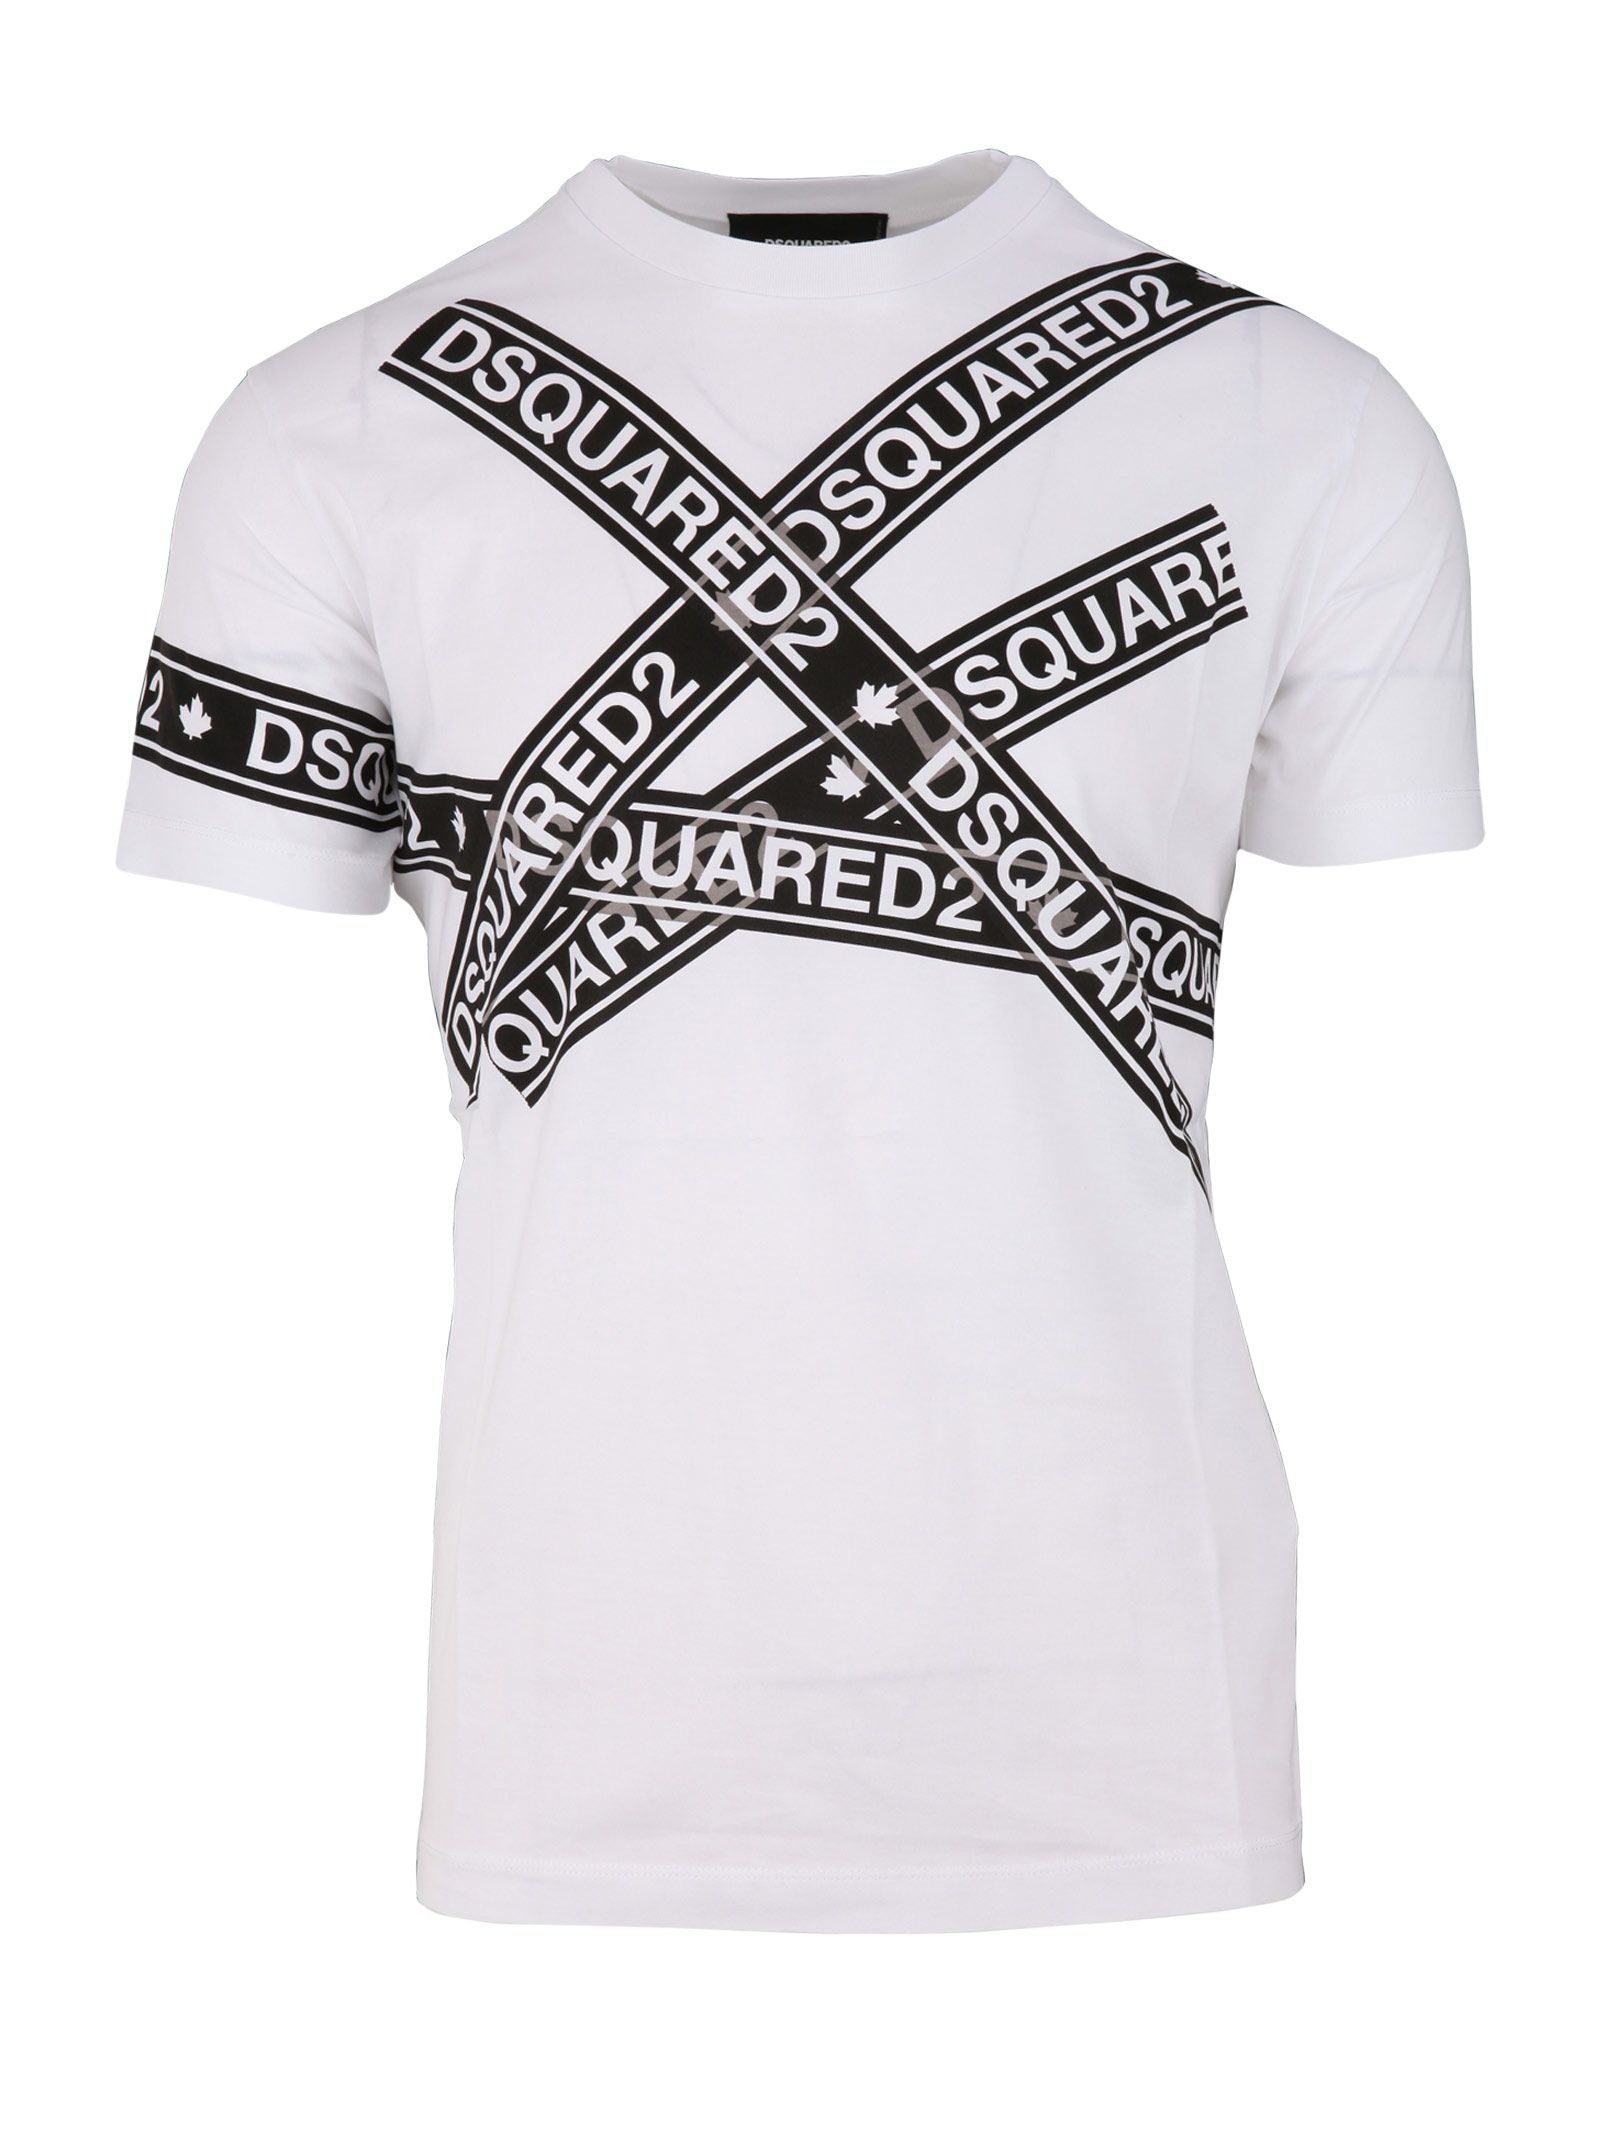 Love dsquared2 slim fit t shirt long with sleeves